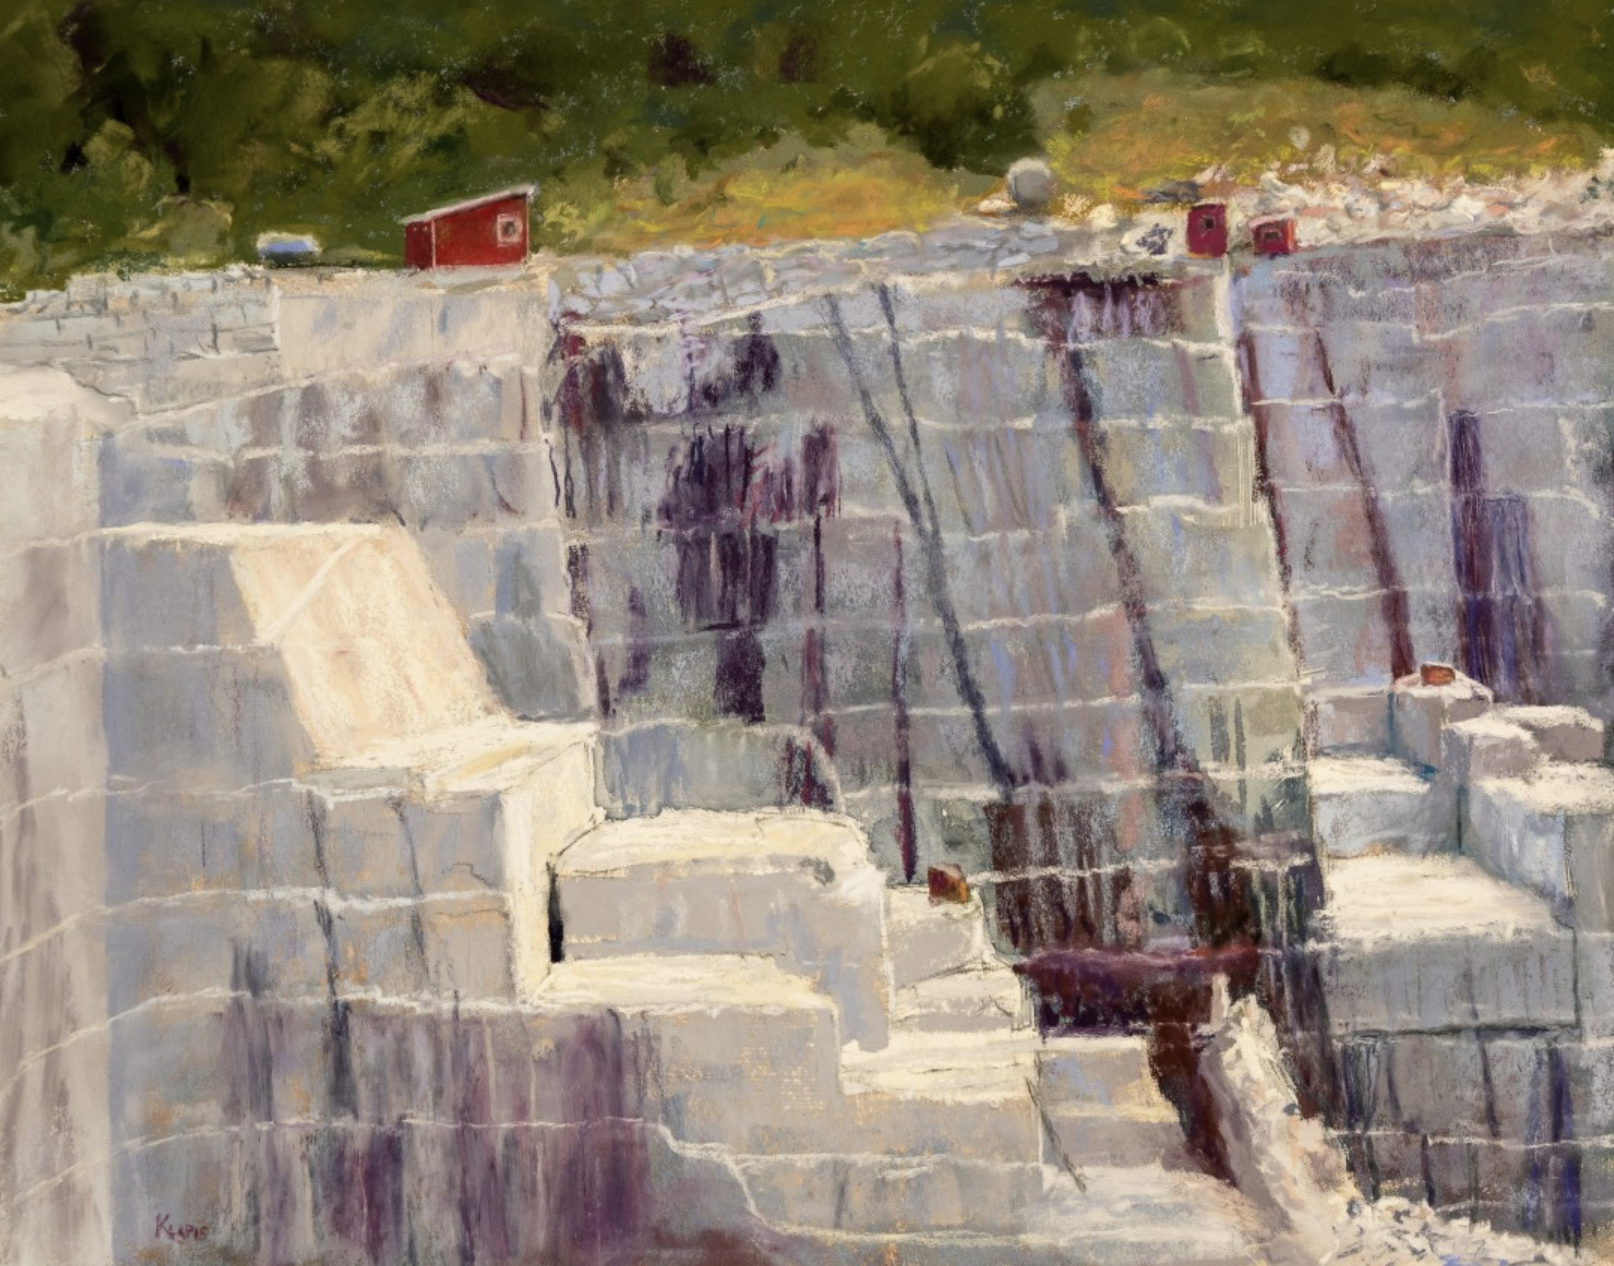 third quarter winners-Ralph Klapis, "Rock of Ages," pastel on Lux Archival, 11 x 14 in.